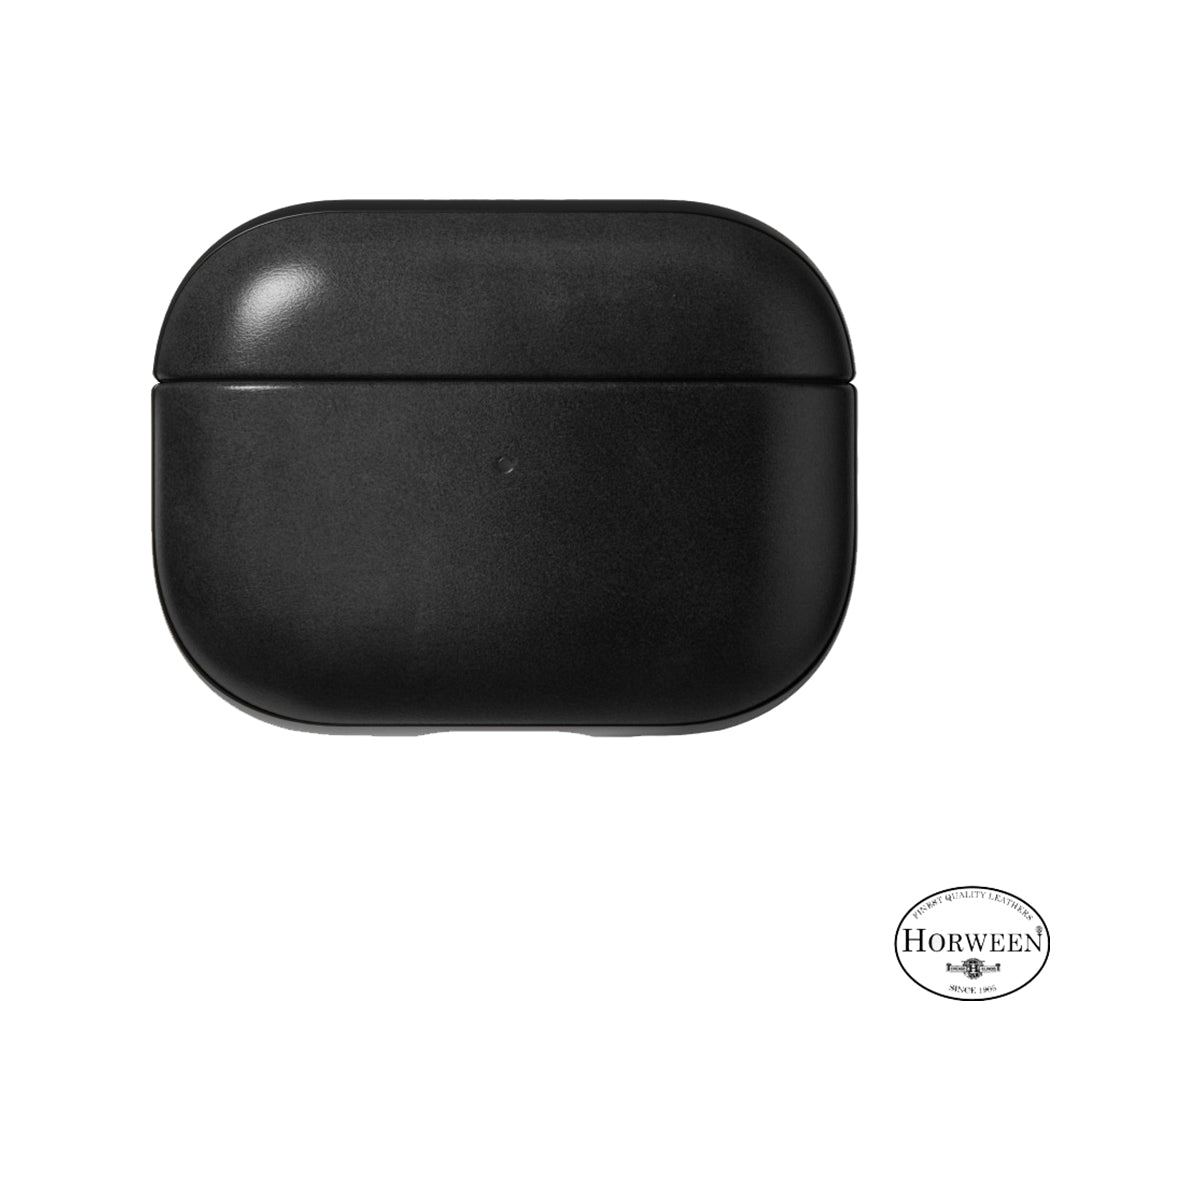 NOMAD Modern Leather Case for Apple AirPods Pro 2 - Black Horween Leather.